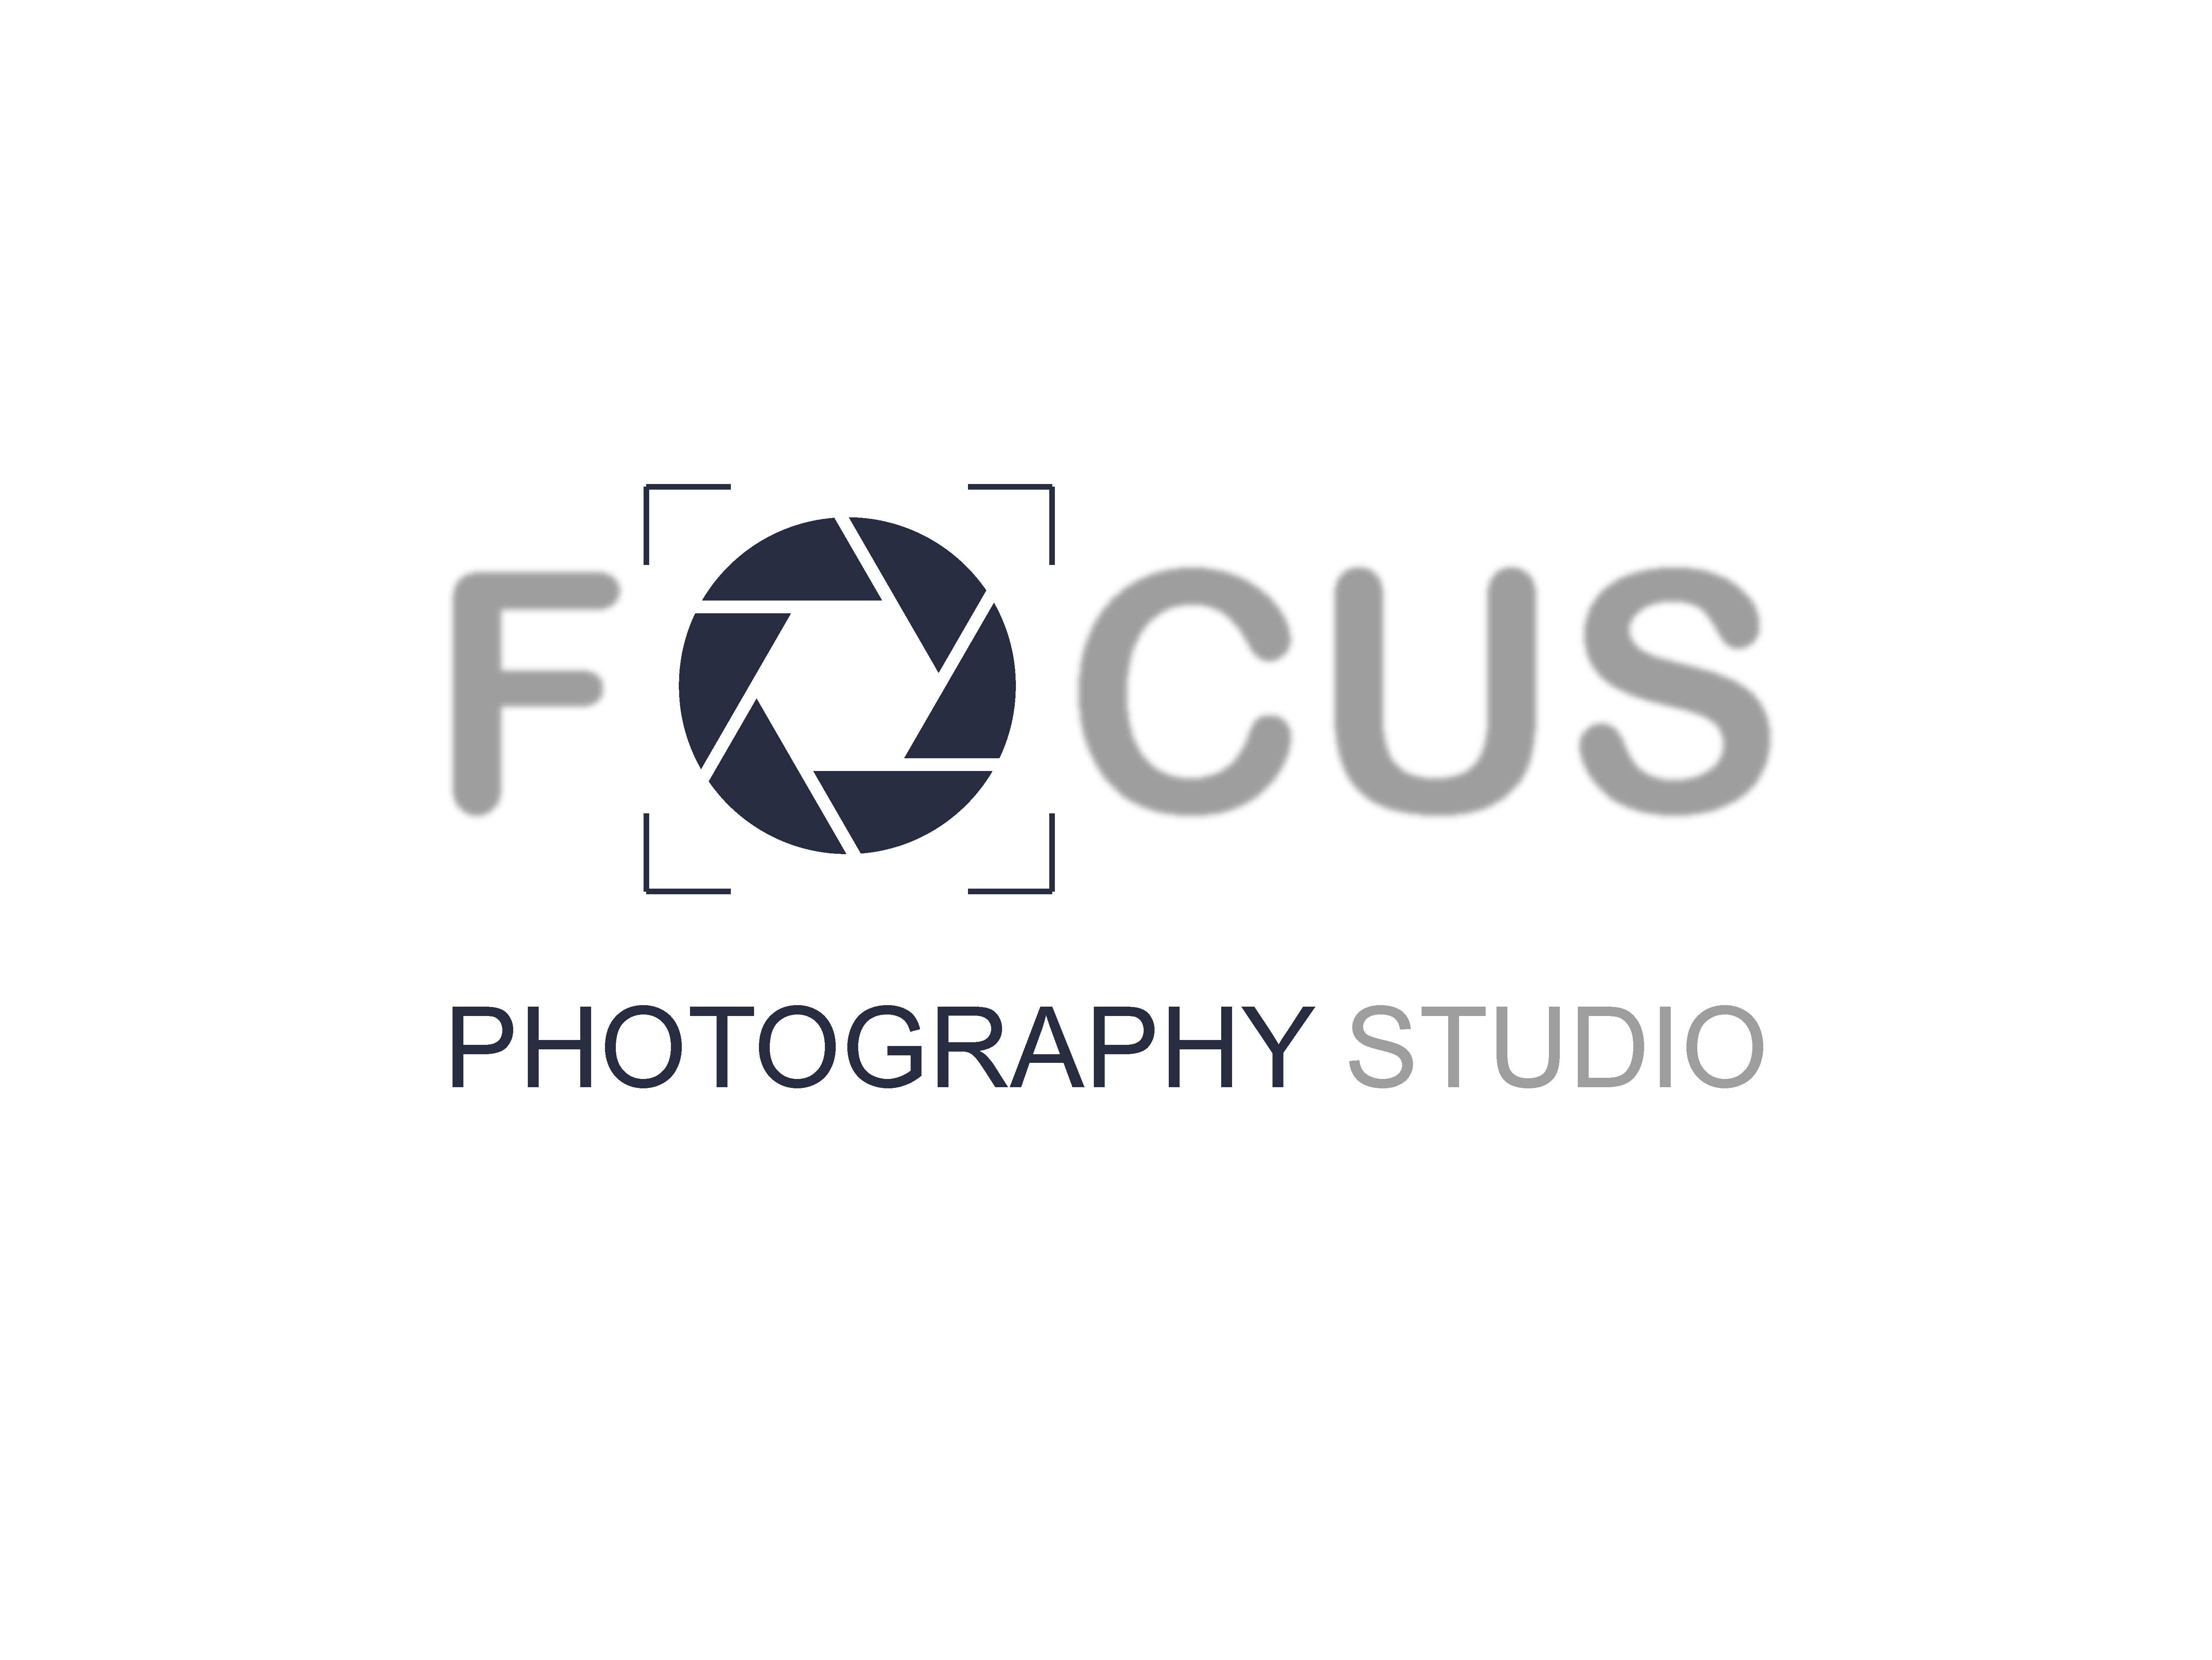 Photography Logo PNG Transparent Images Free Download | Vector Files |  Pngtree